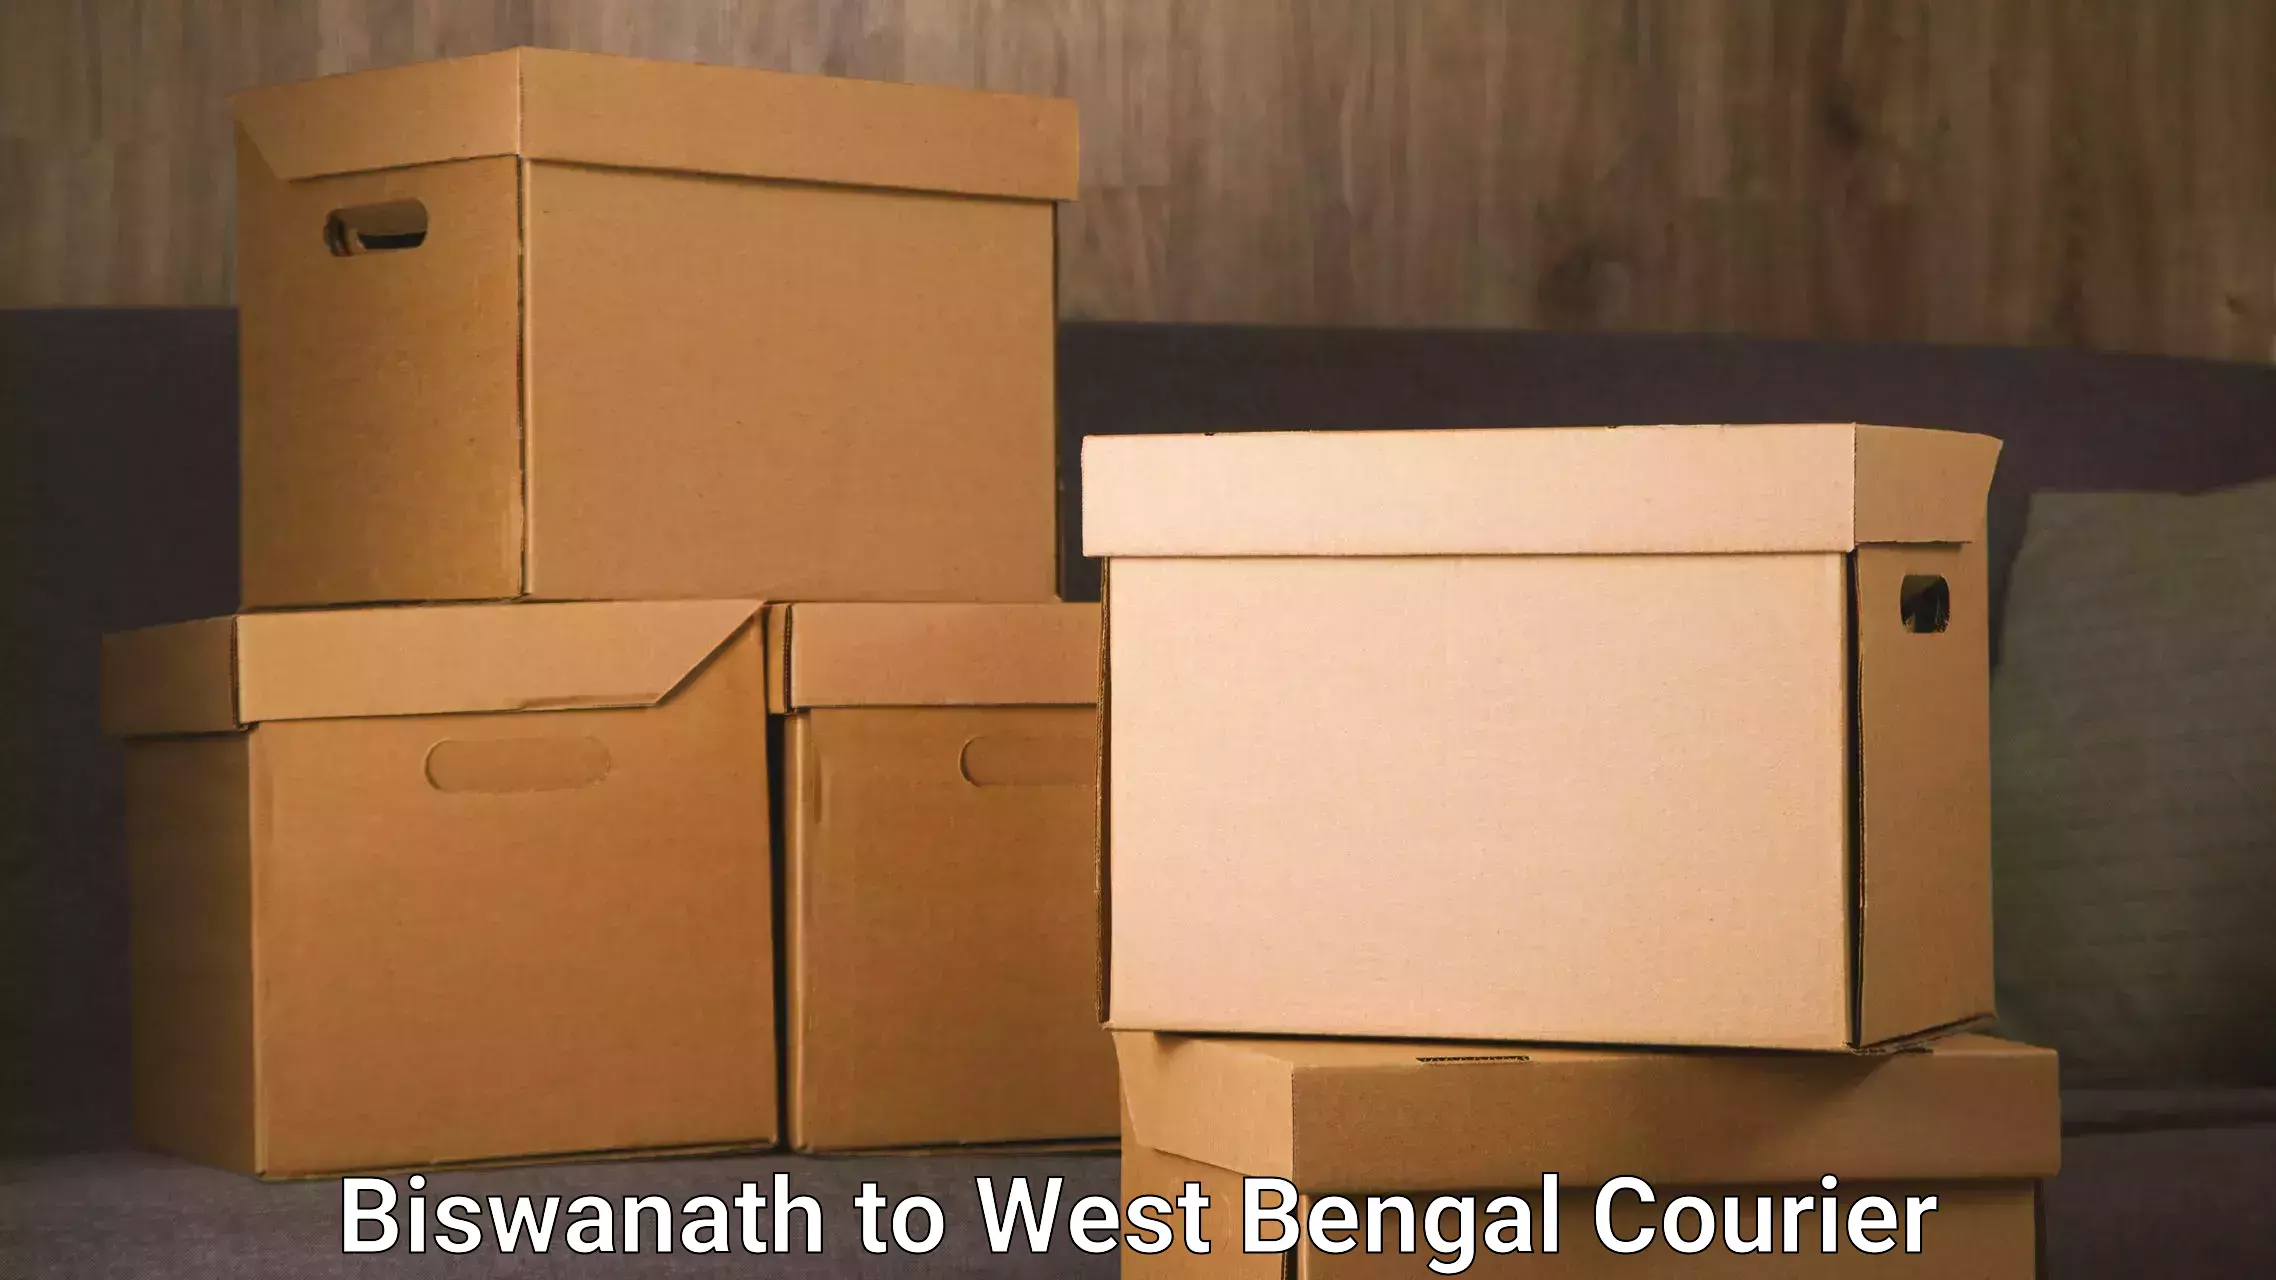 Courier services in Biswanath to Gangajalghati